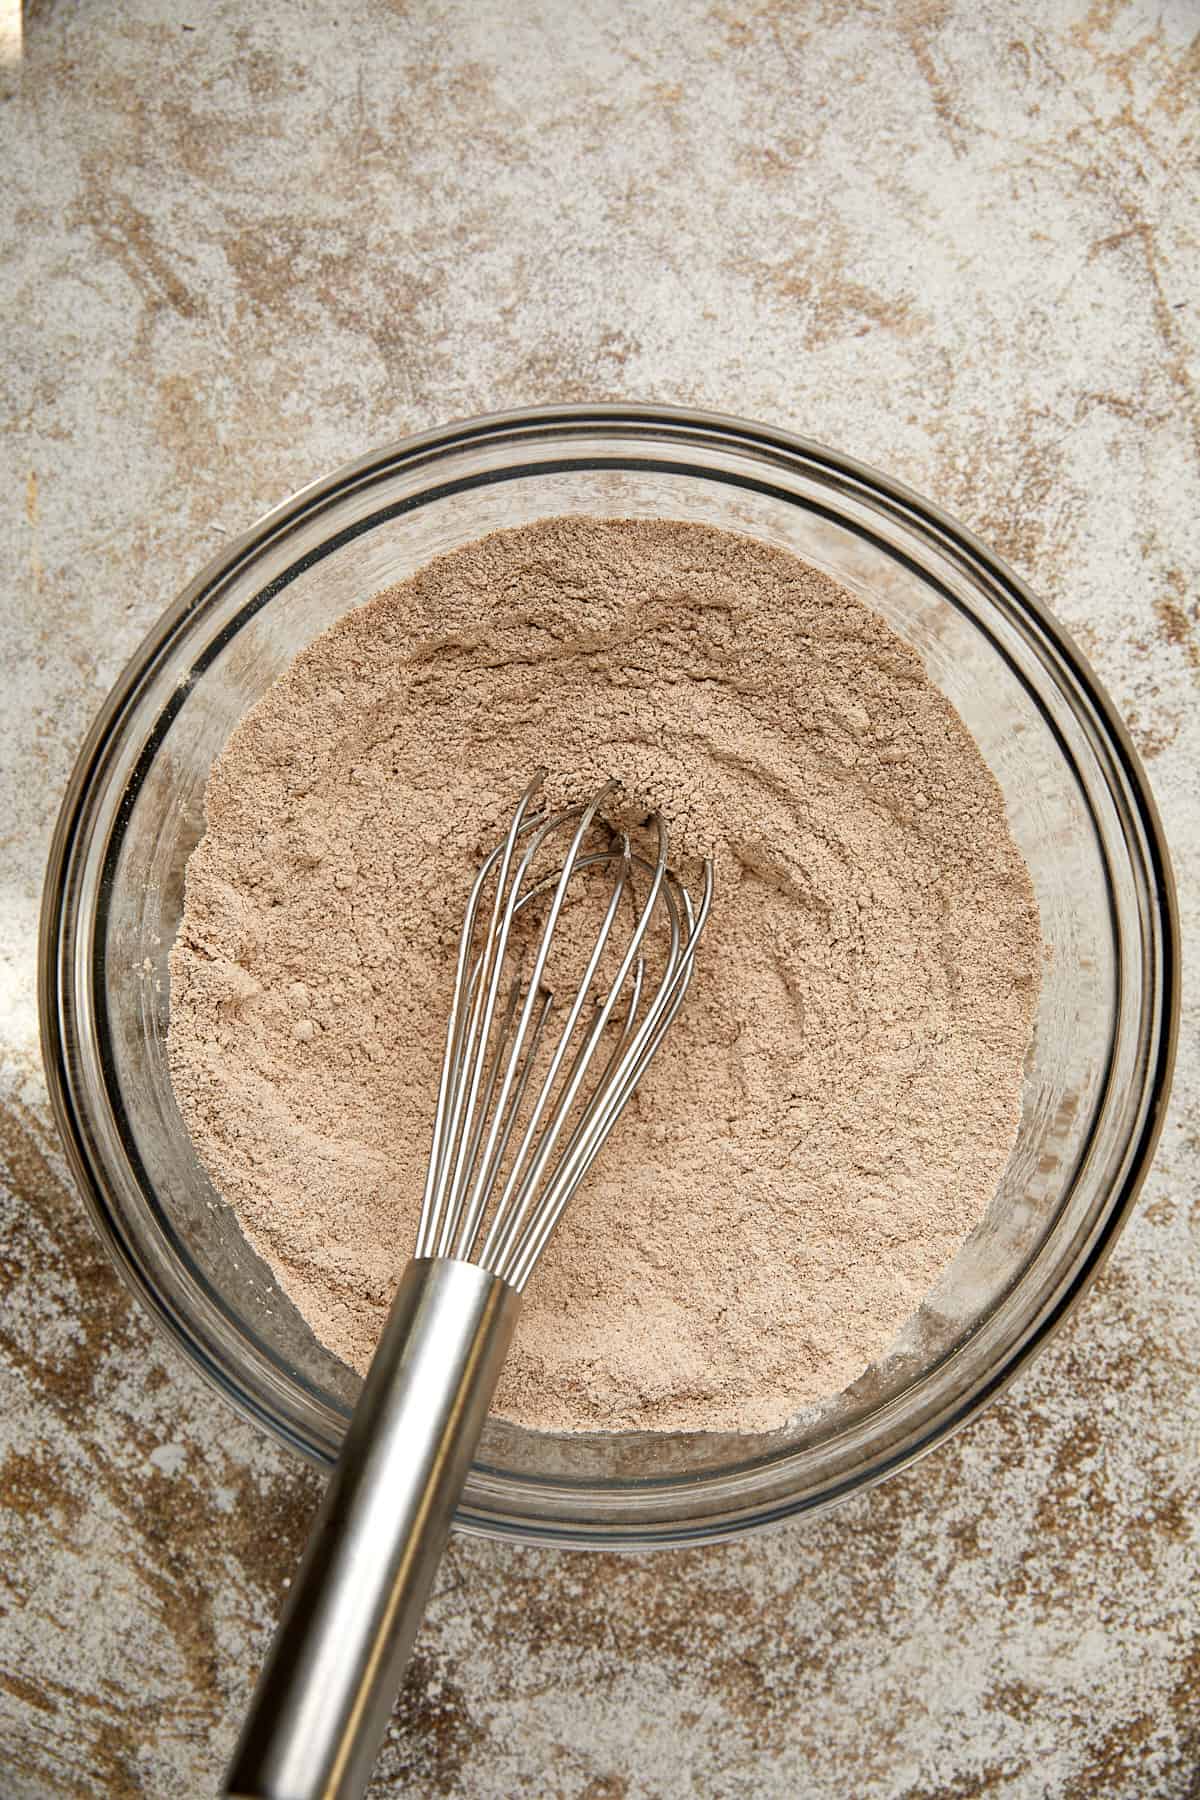 dry ingredients mixed with a whisk in a glass bowl.